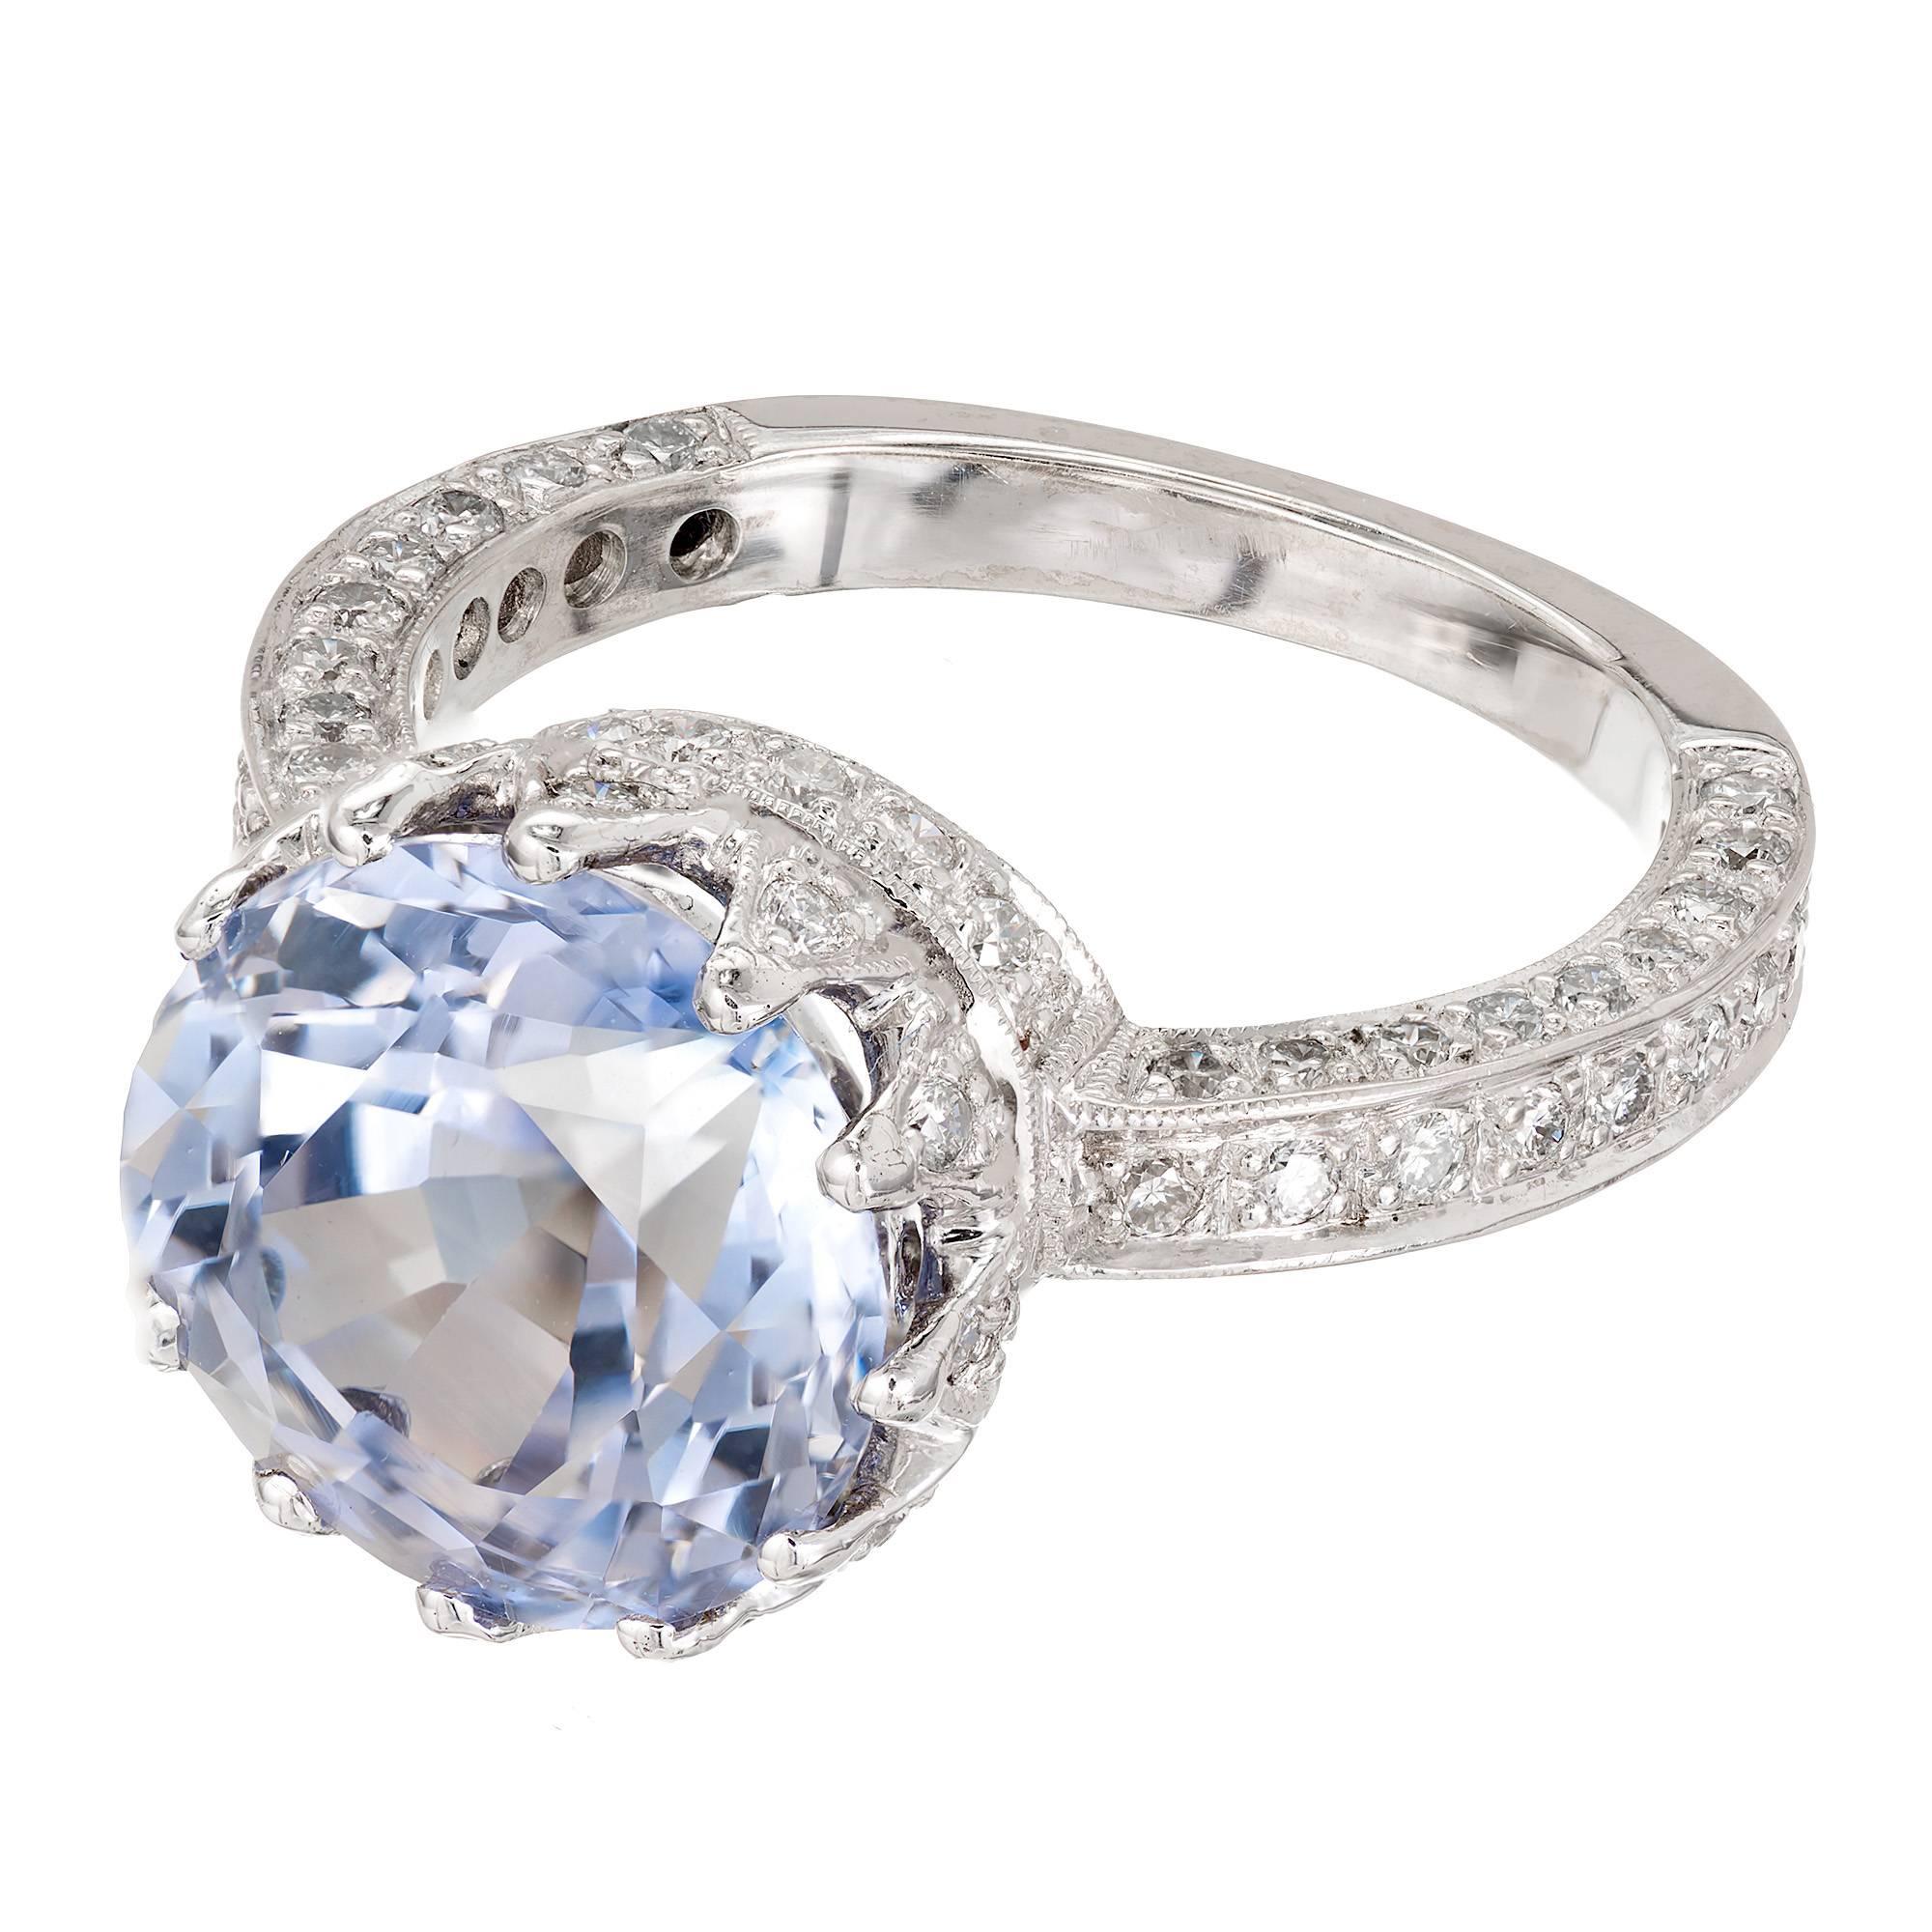 Peter Suchy vintage Inspired queens crown sapphire and diamond engagement ring. 18k white gold setting with Pavé set bright white full cut Diamond accents. The center Sapphire is from an estate circa 1910 in light periwinkle blue old European cut.